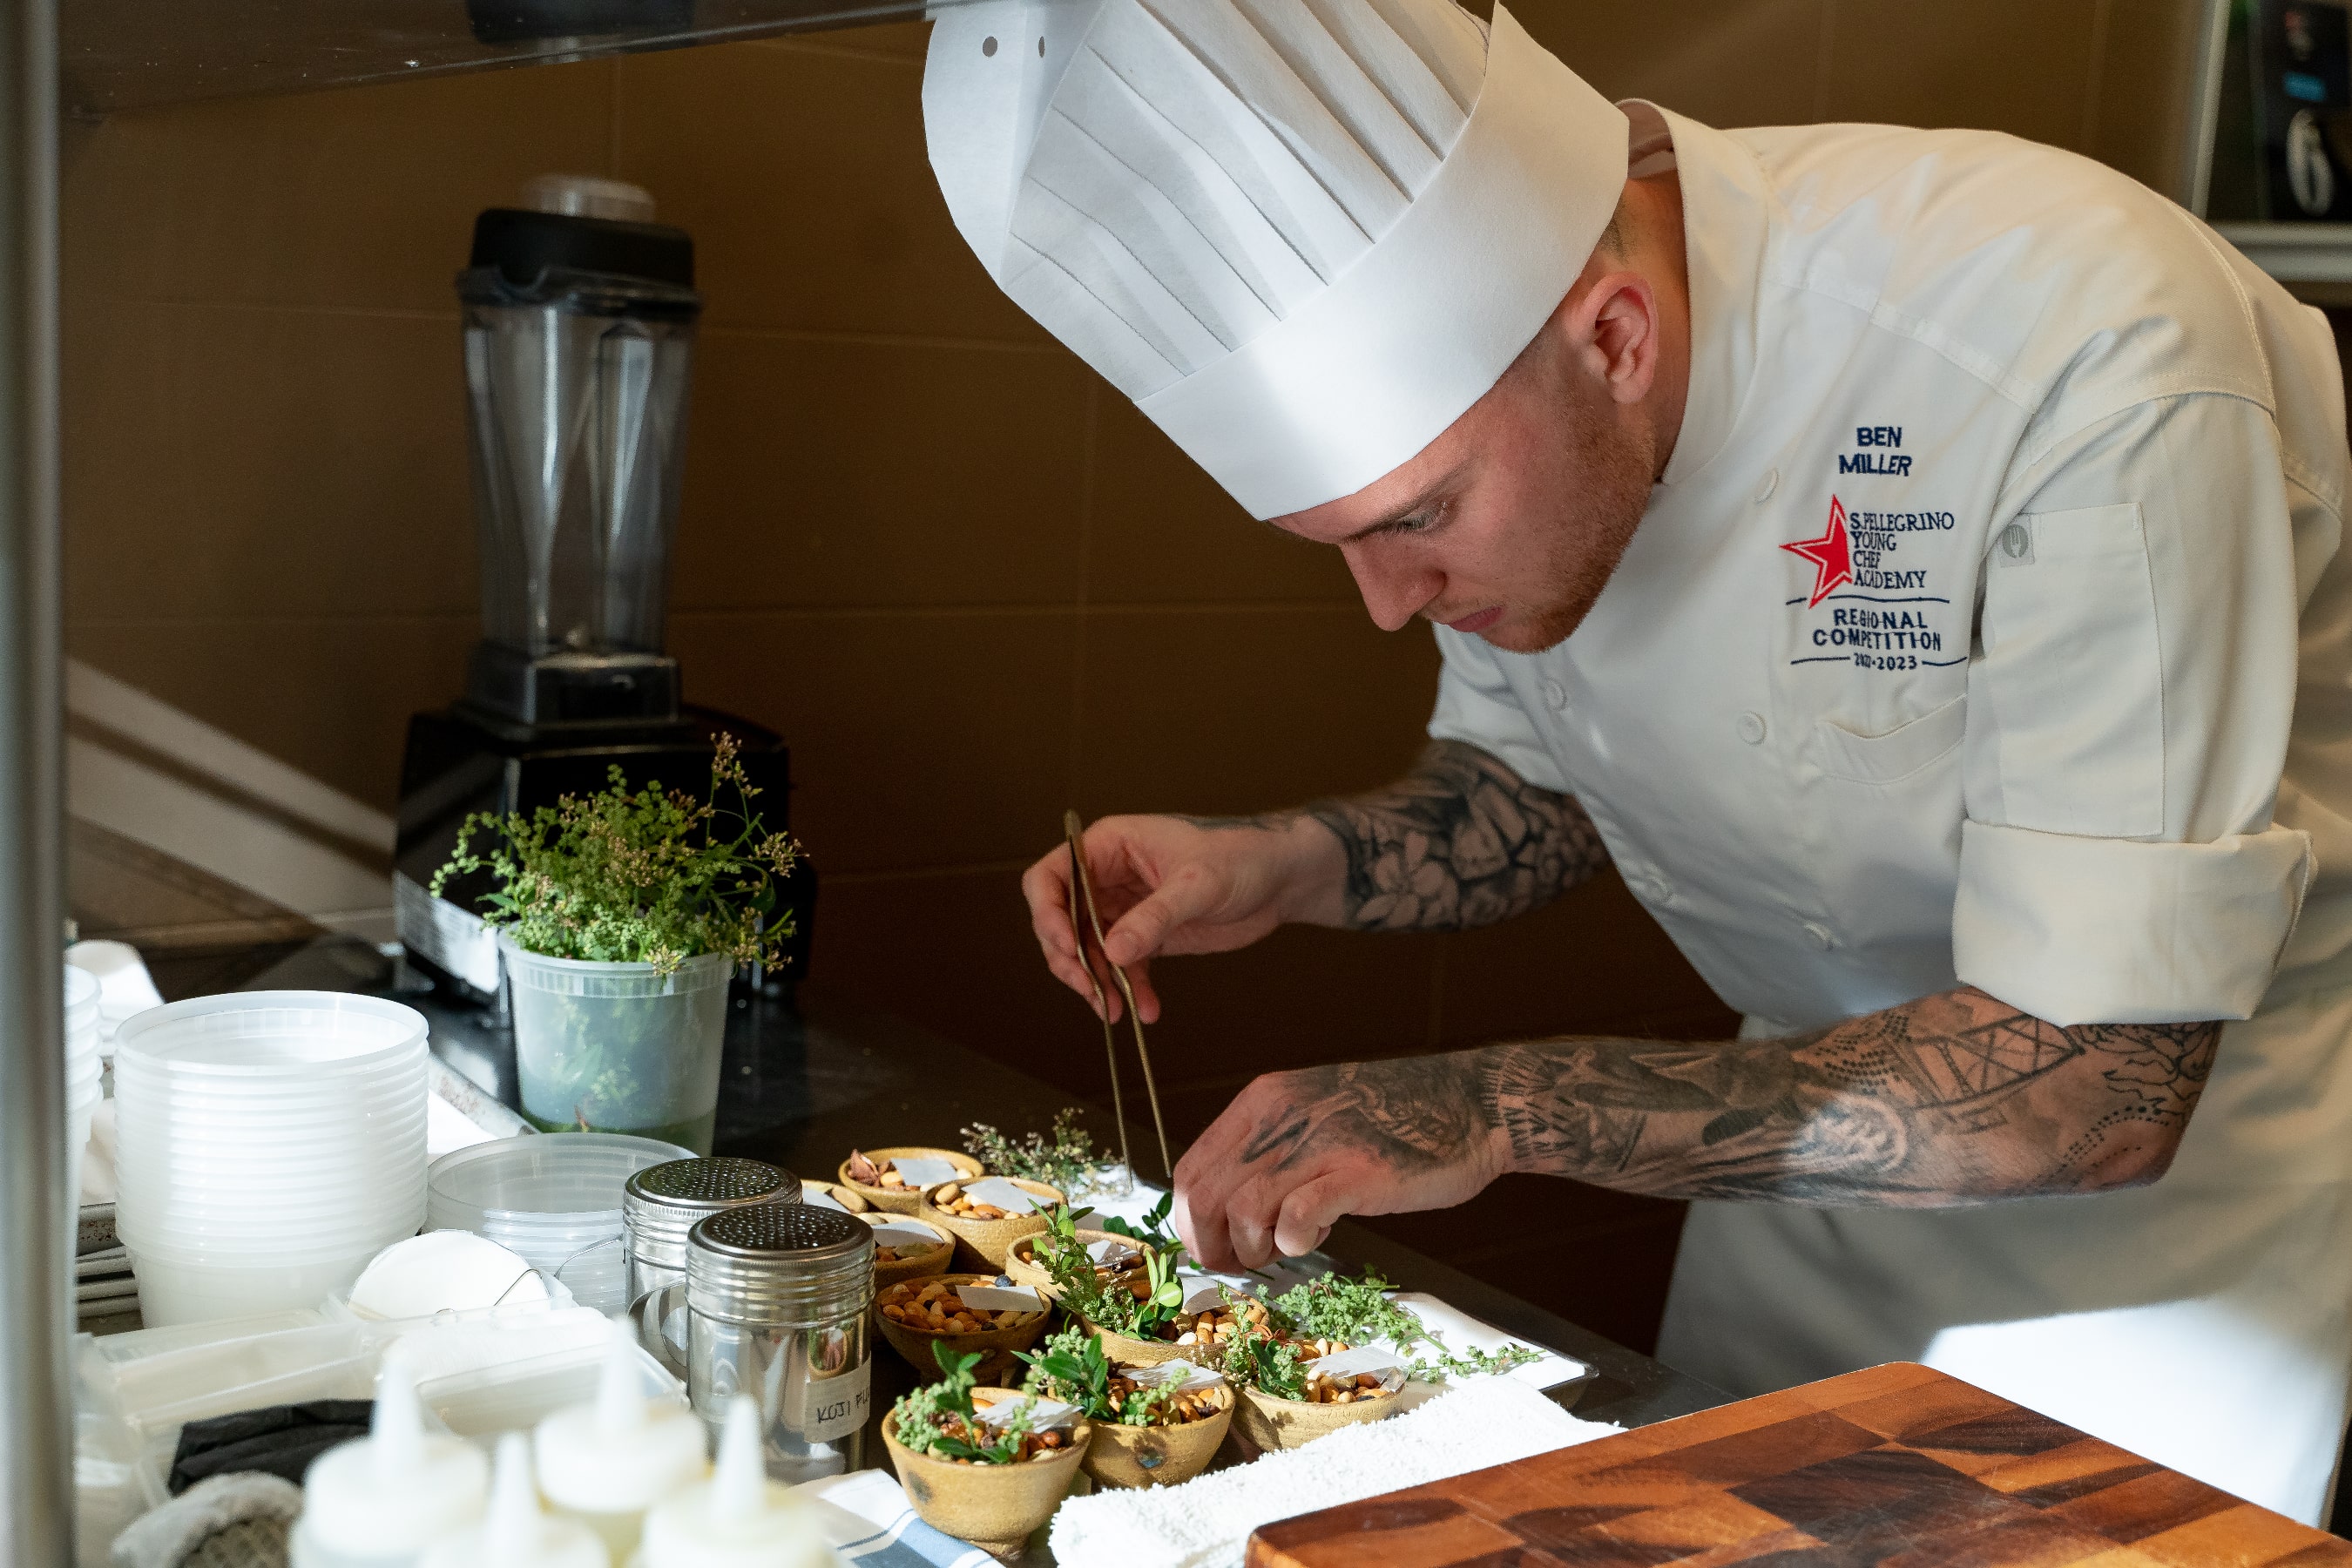 The Competition is more than just a space for young people to showcase their skills. It is also a pathway to the S.Pellegrino Young Chef Academy.